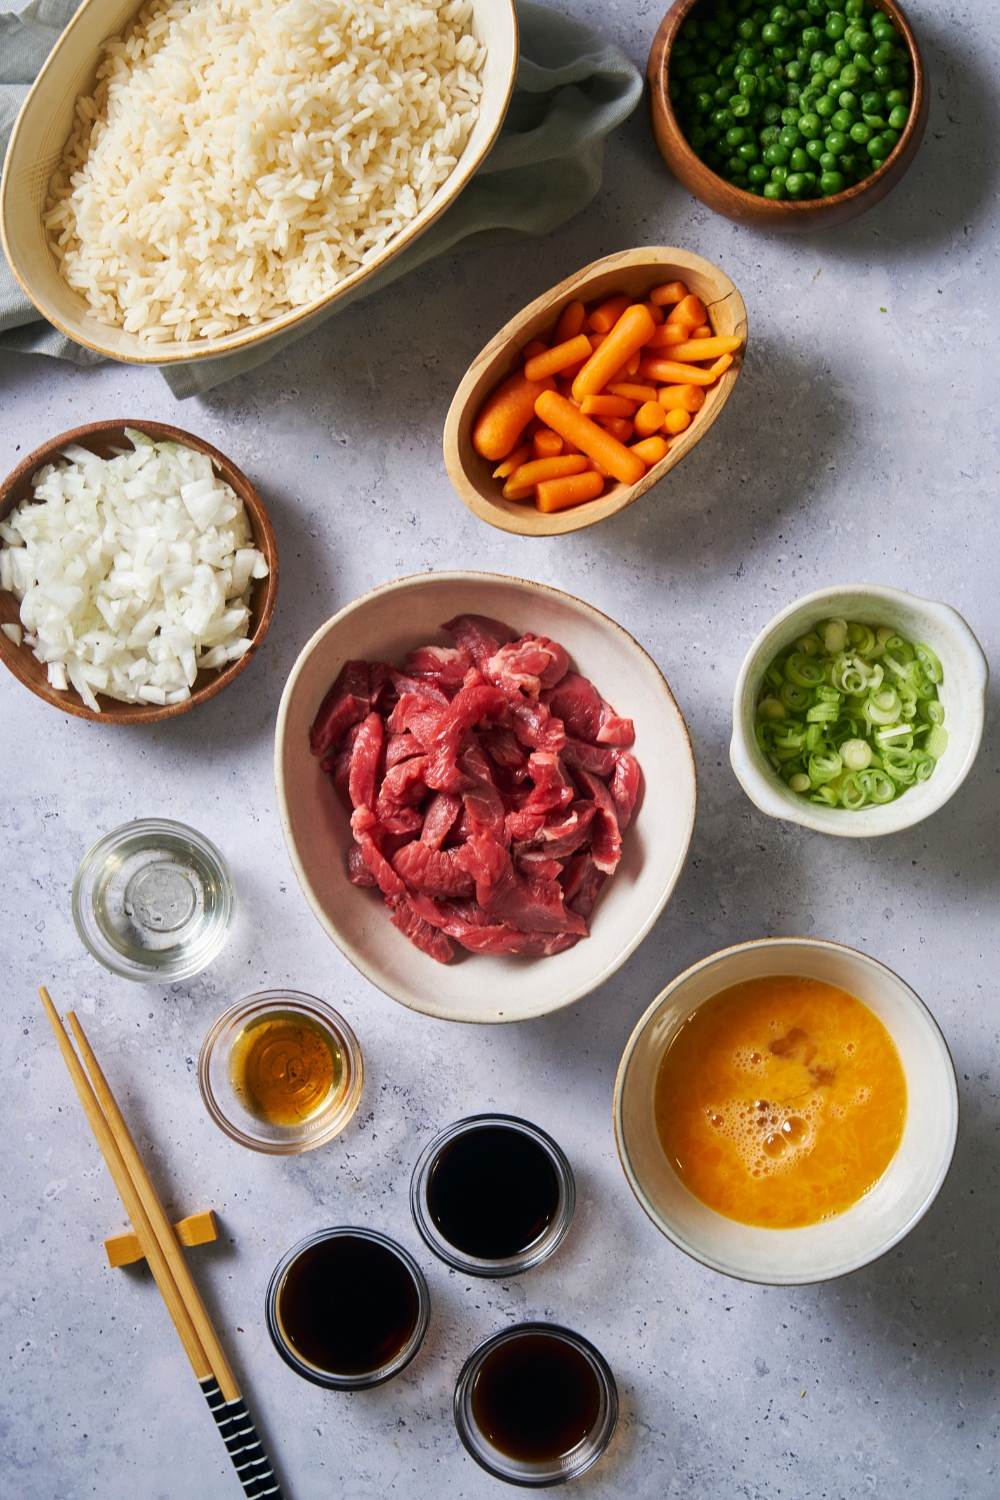 An assortment of ingredients including bowls of raw beef, carrots, peas, scallions, beaten eggs, onion, rice, and various sauces.